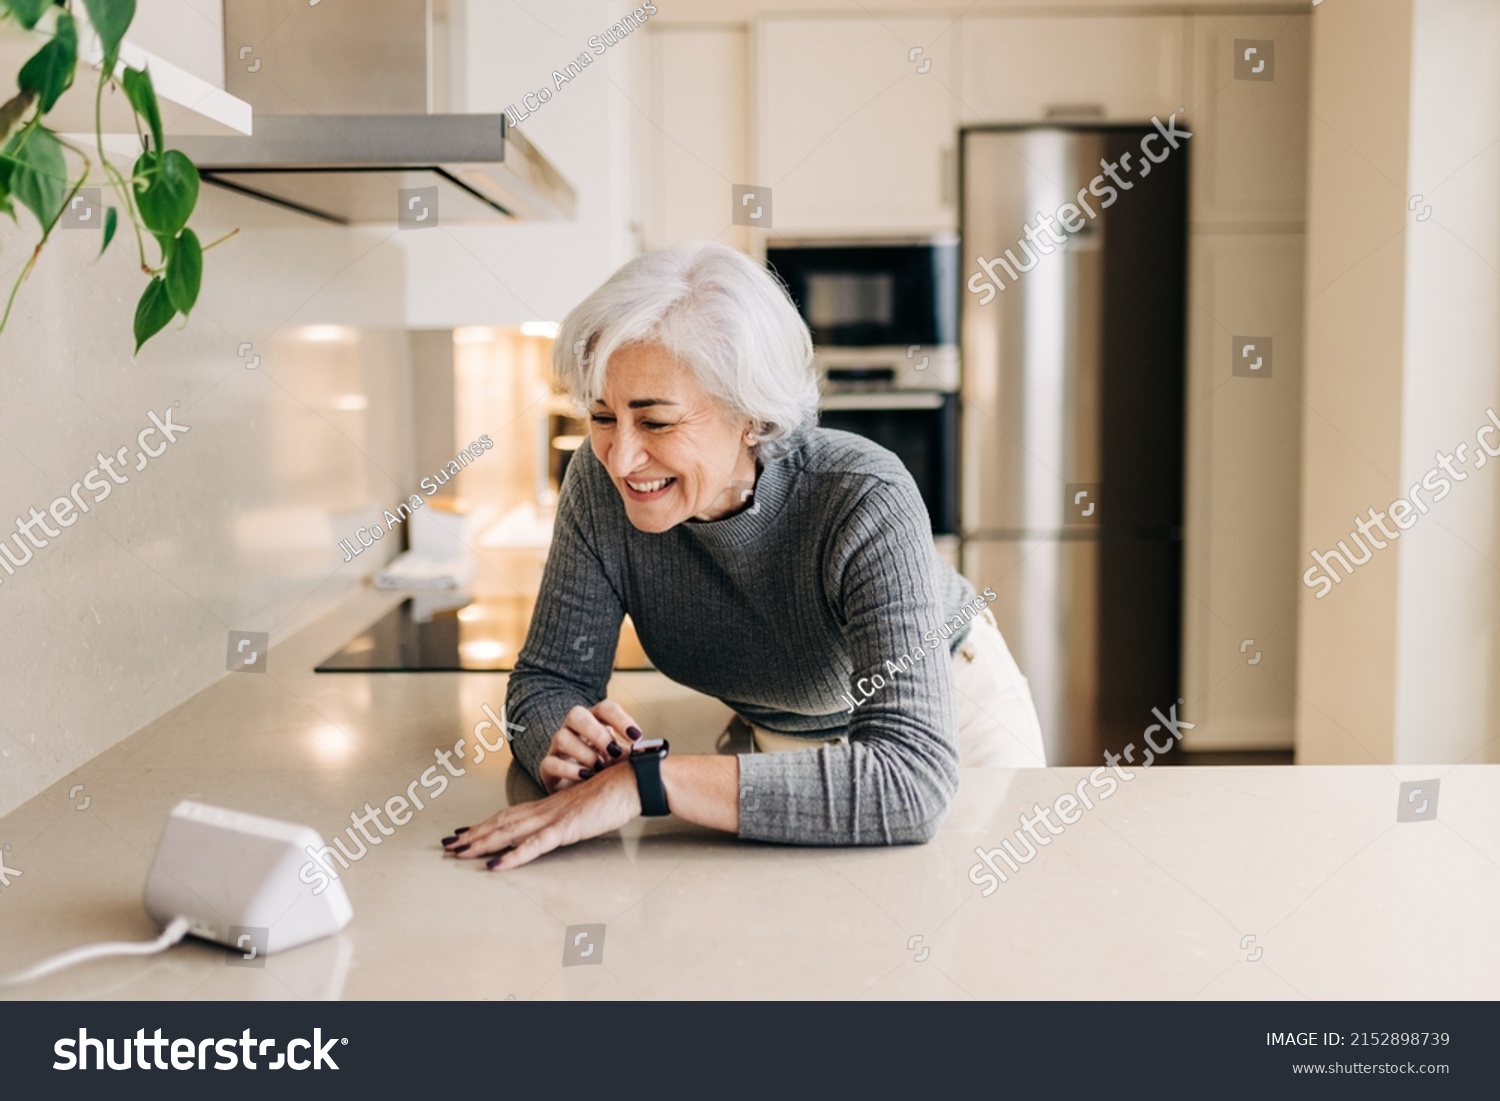 Senior woman smiling happily while using smart devices in her kitchen. Cheerful elderly woman using a home assistant to perform tasks at home. #2152898739